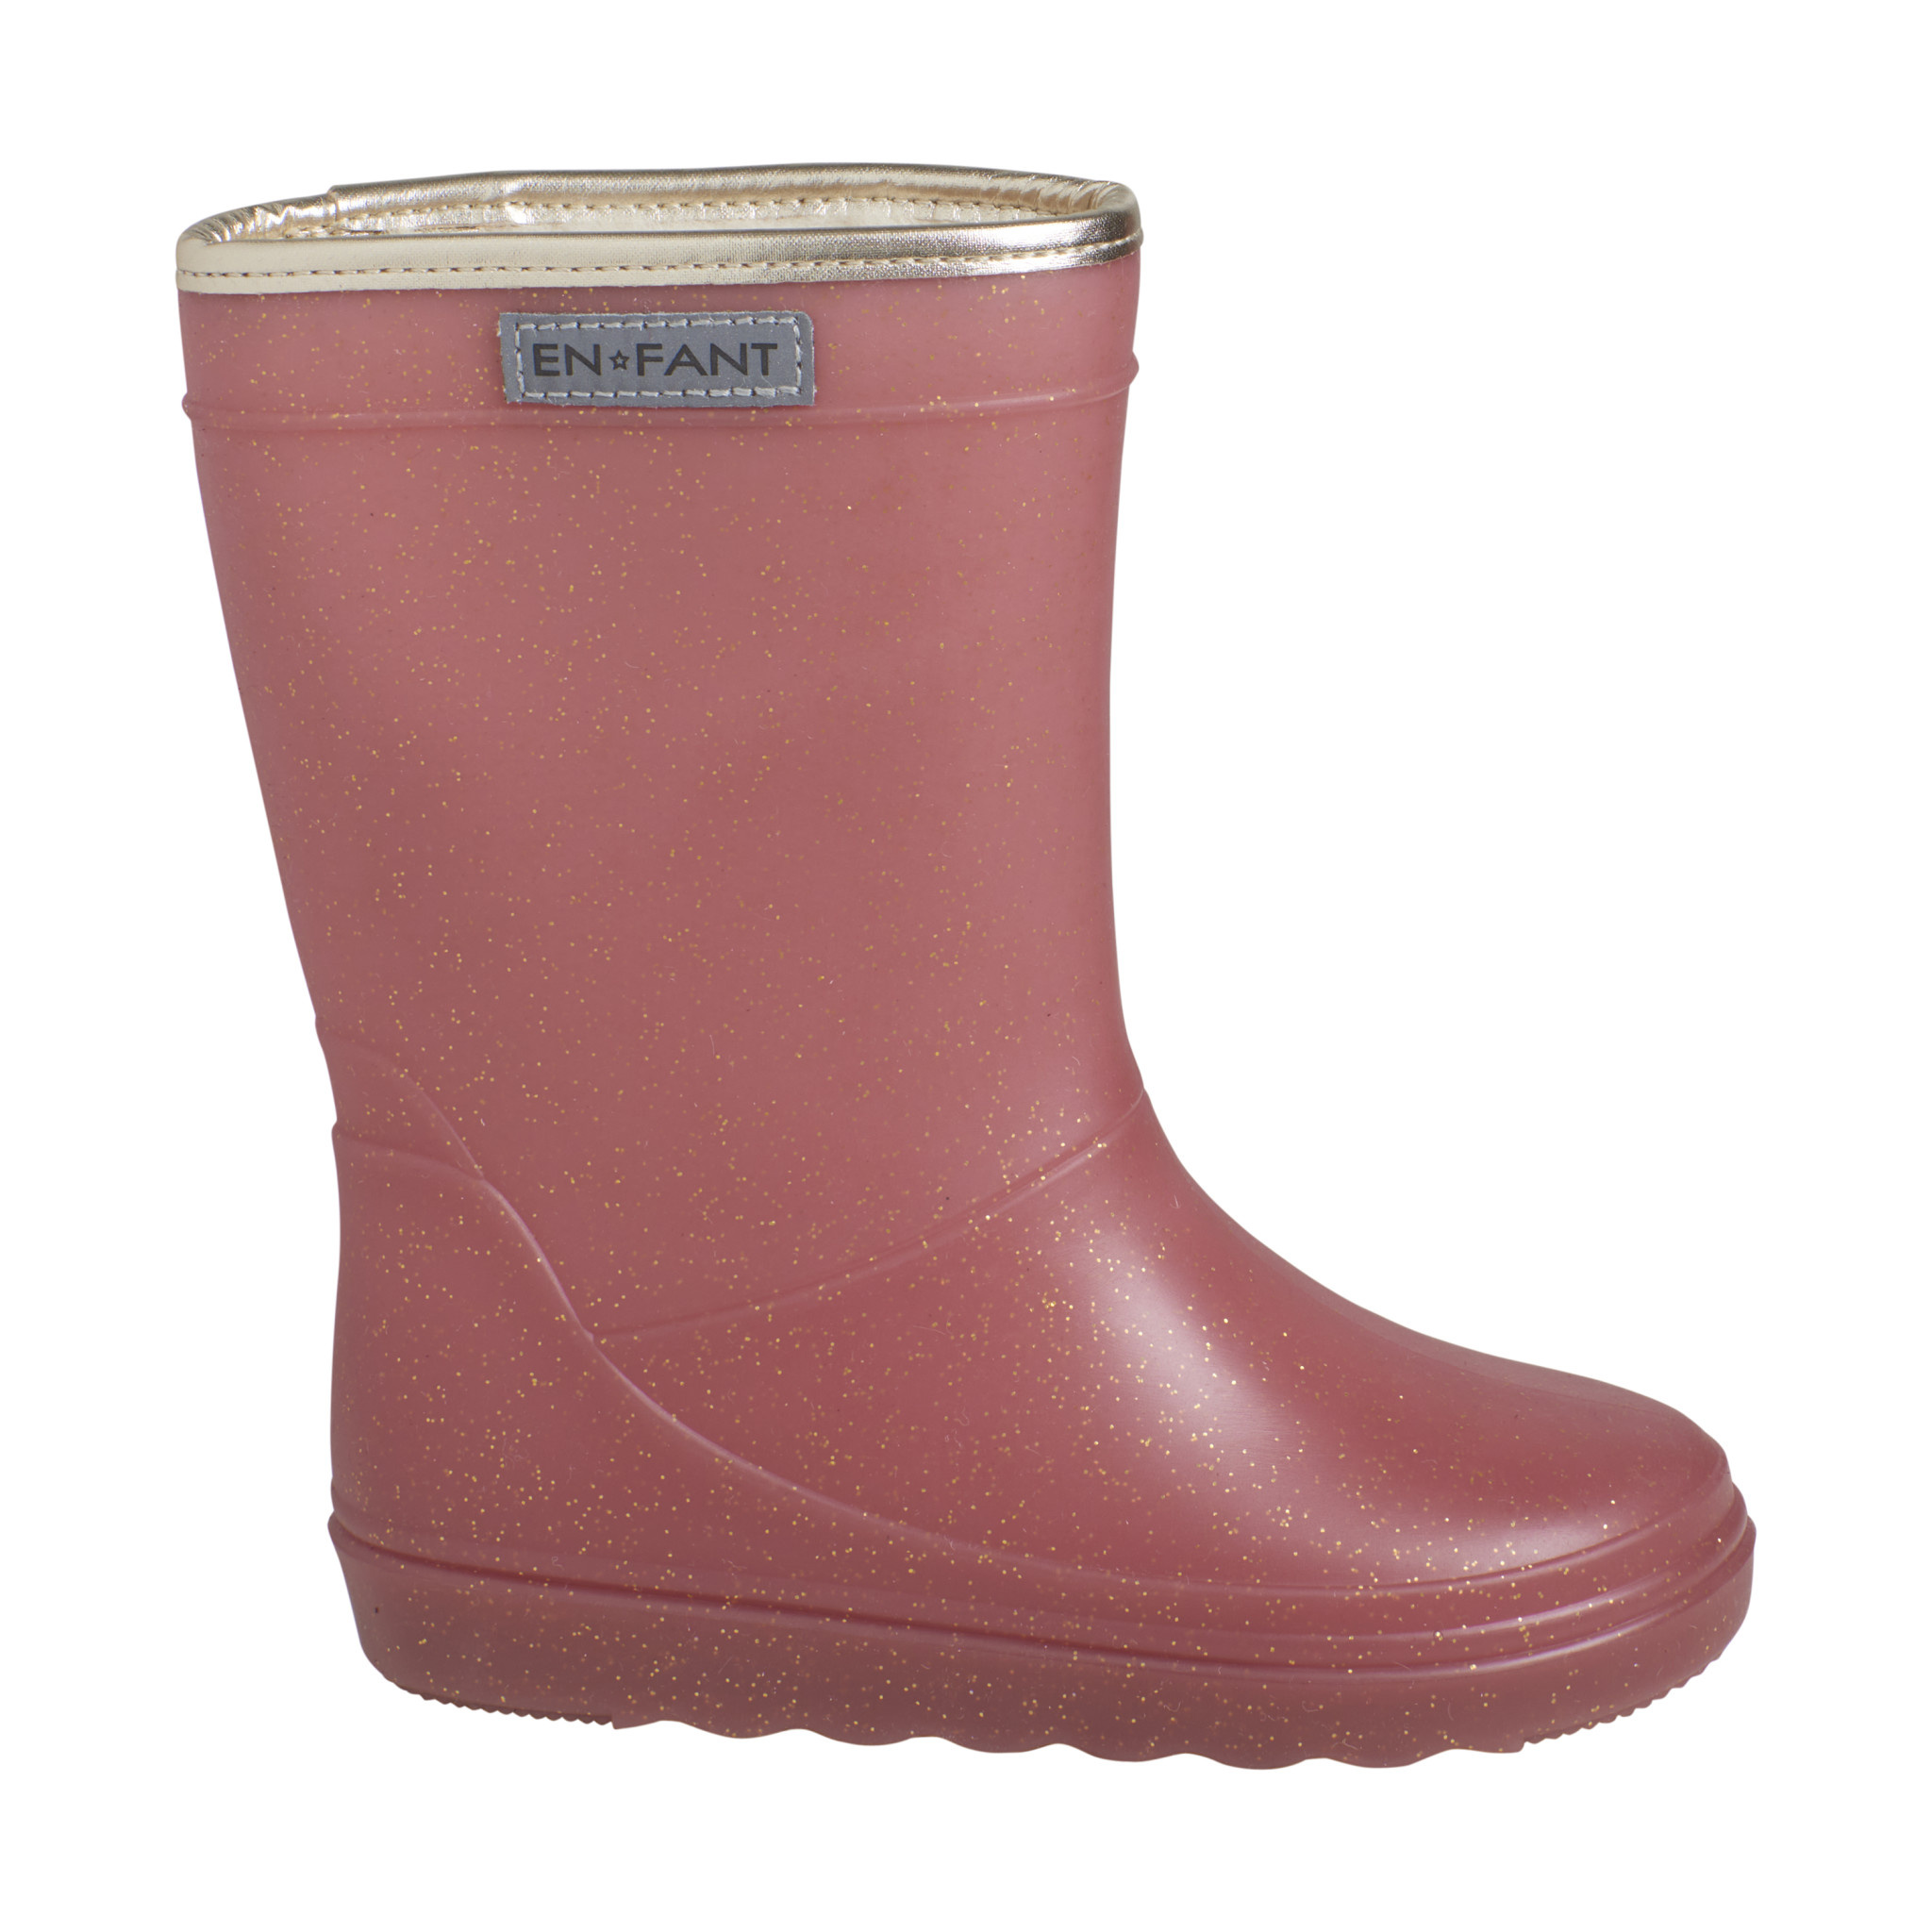 Enfant - Thermo boot Glitter Mesa Rose 5300-2